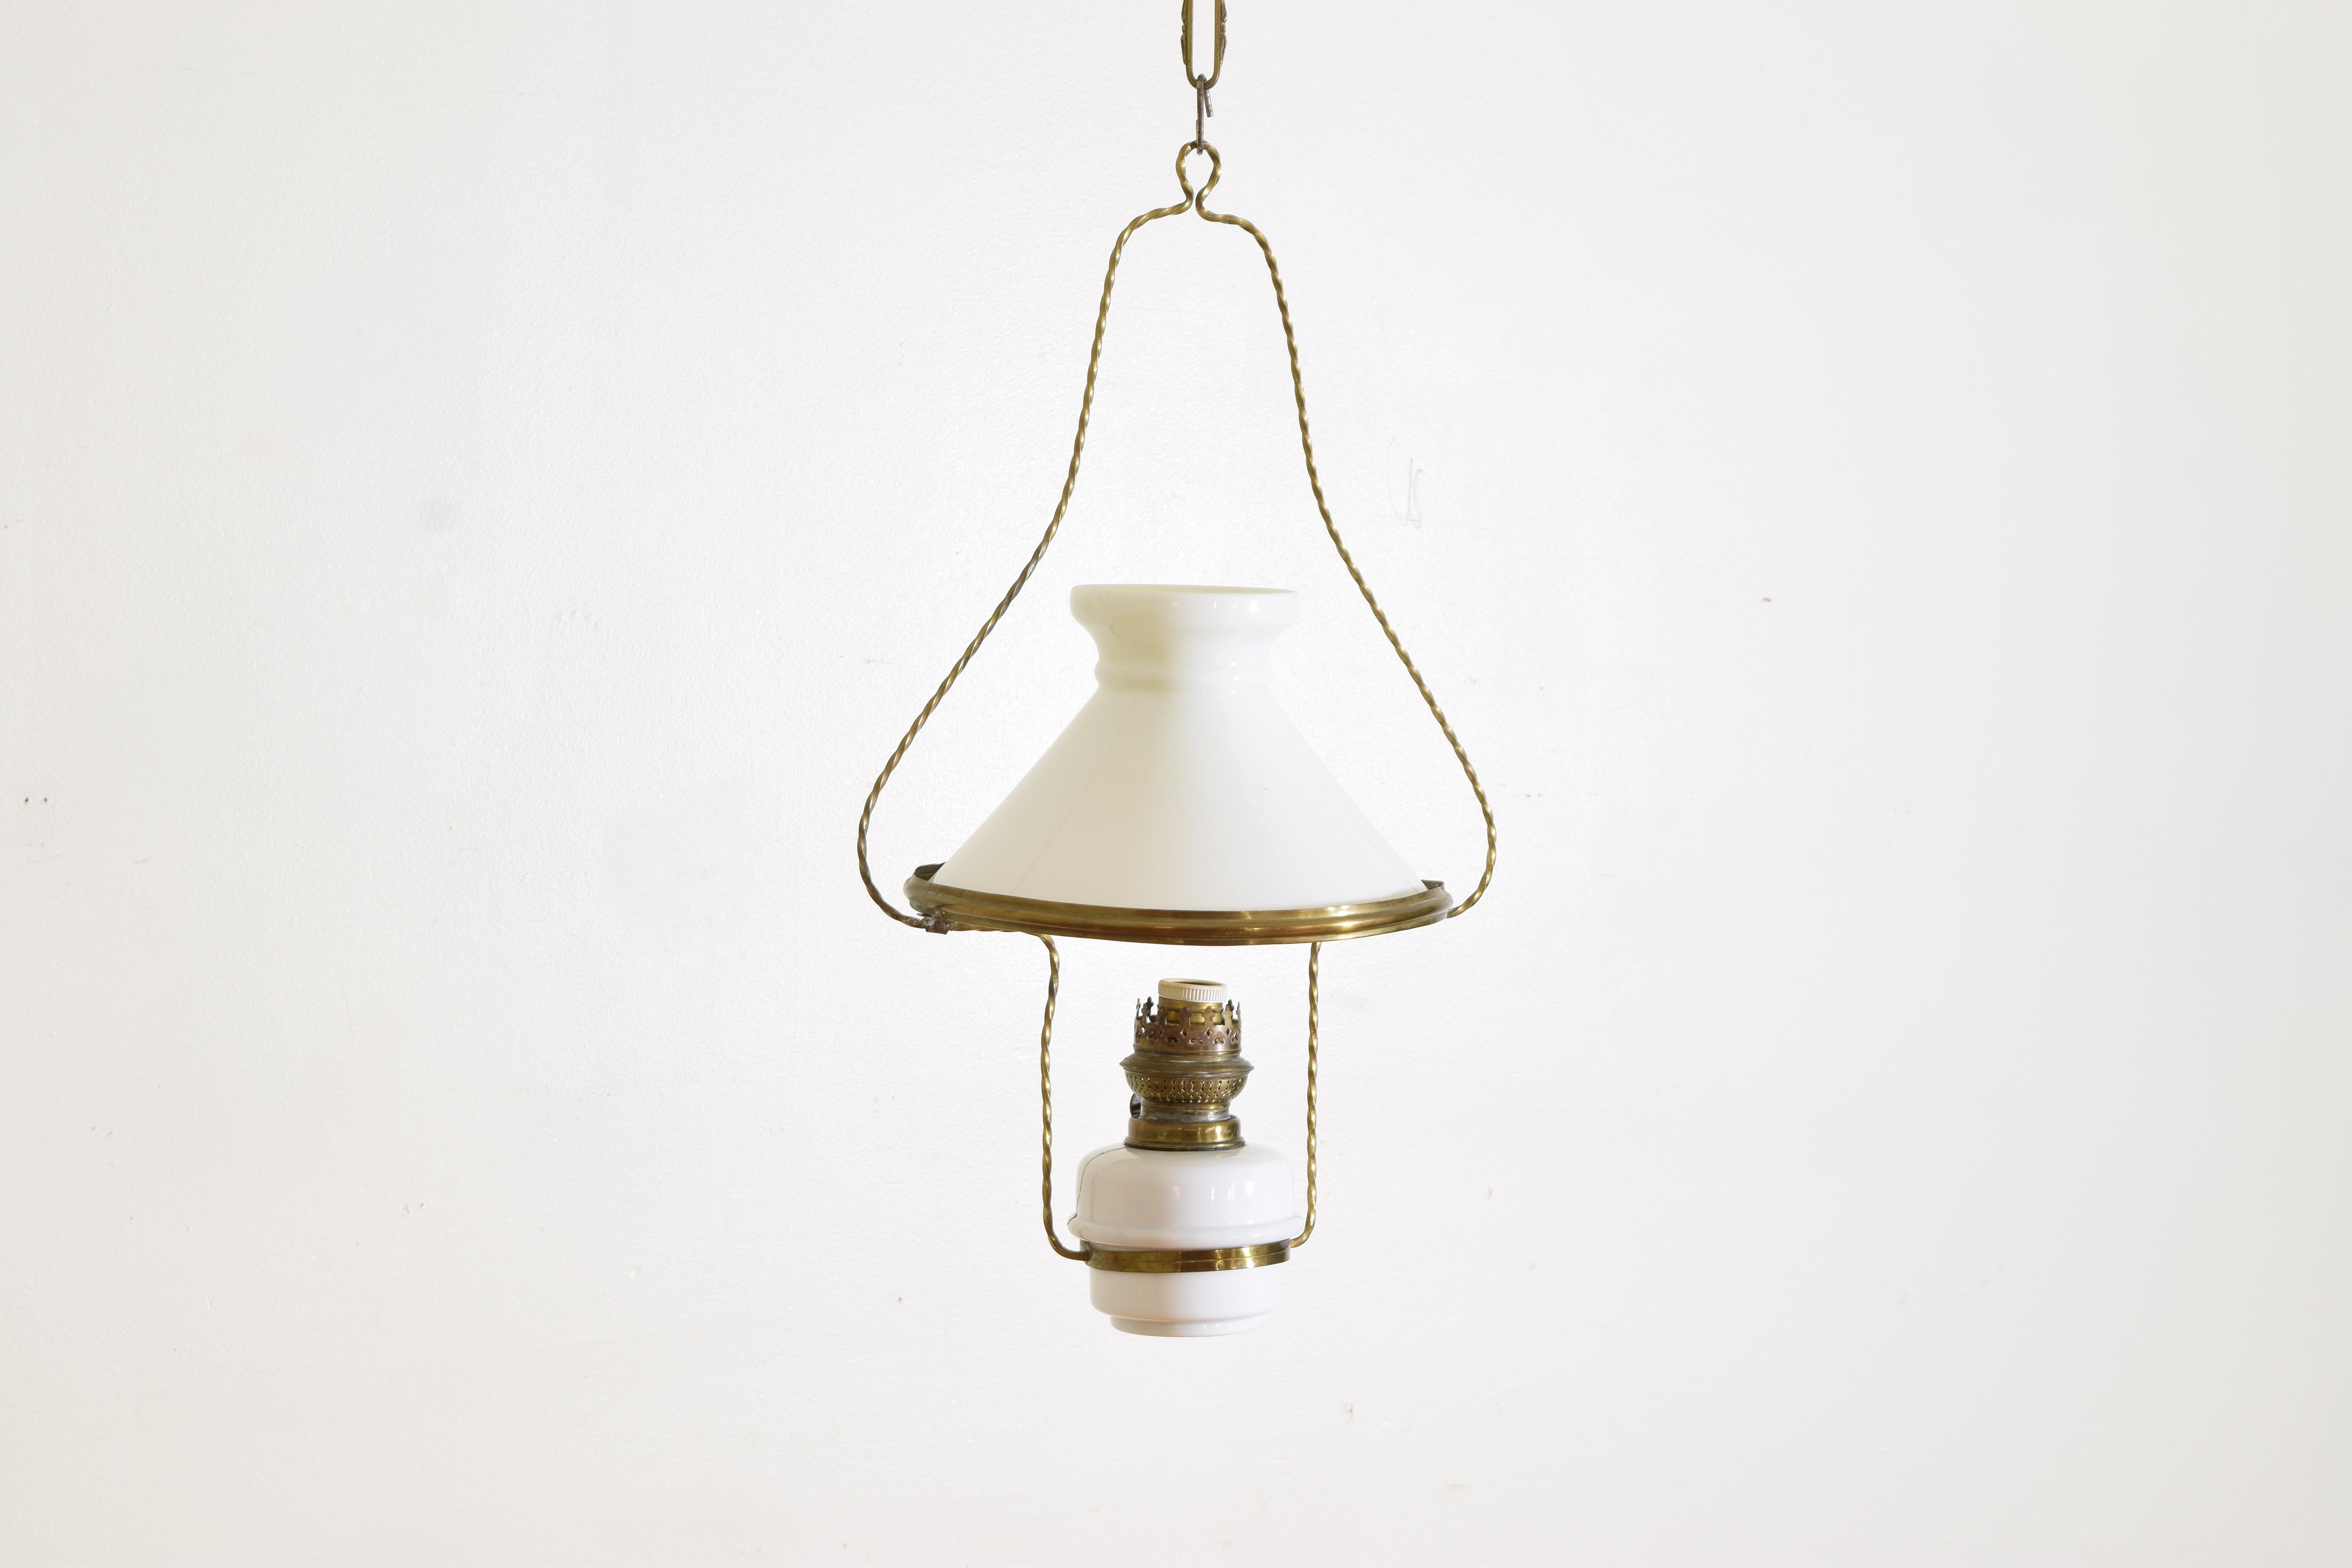 A light and simple lantern with it's original milk glass and brass accents, once an oil lamp with adjustable wick and now electrified with a single socket, the oil reservoir with a repaired crack